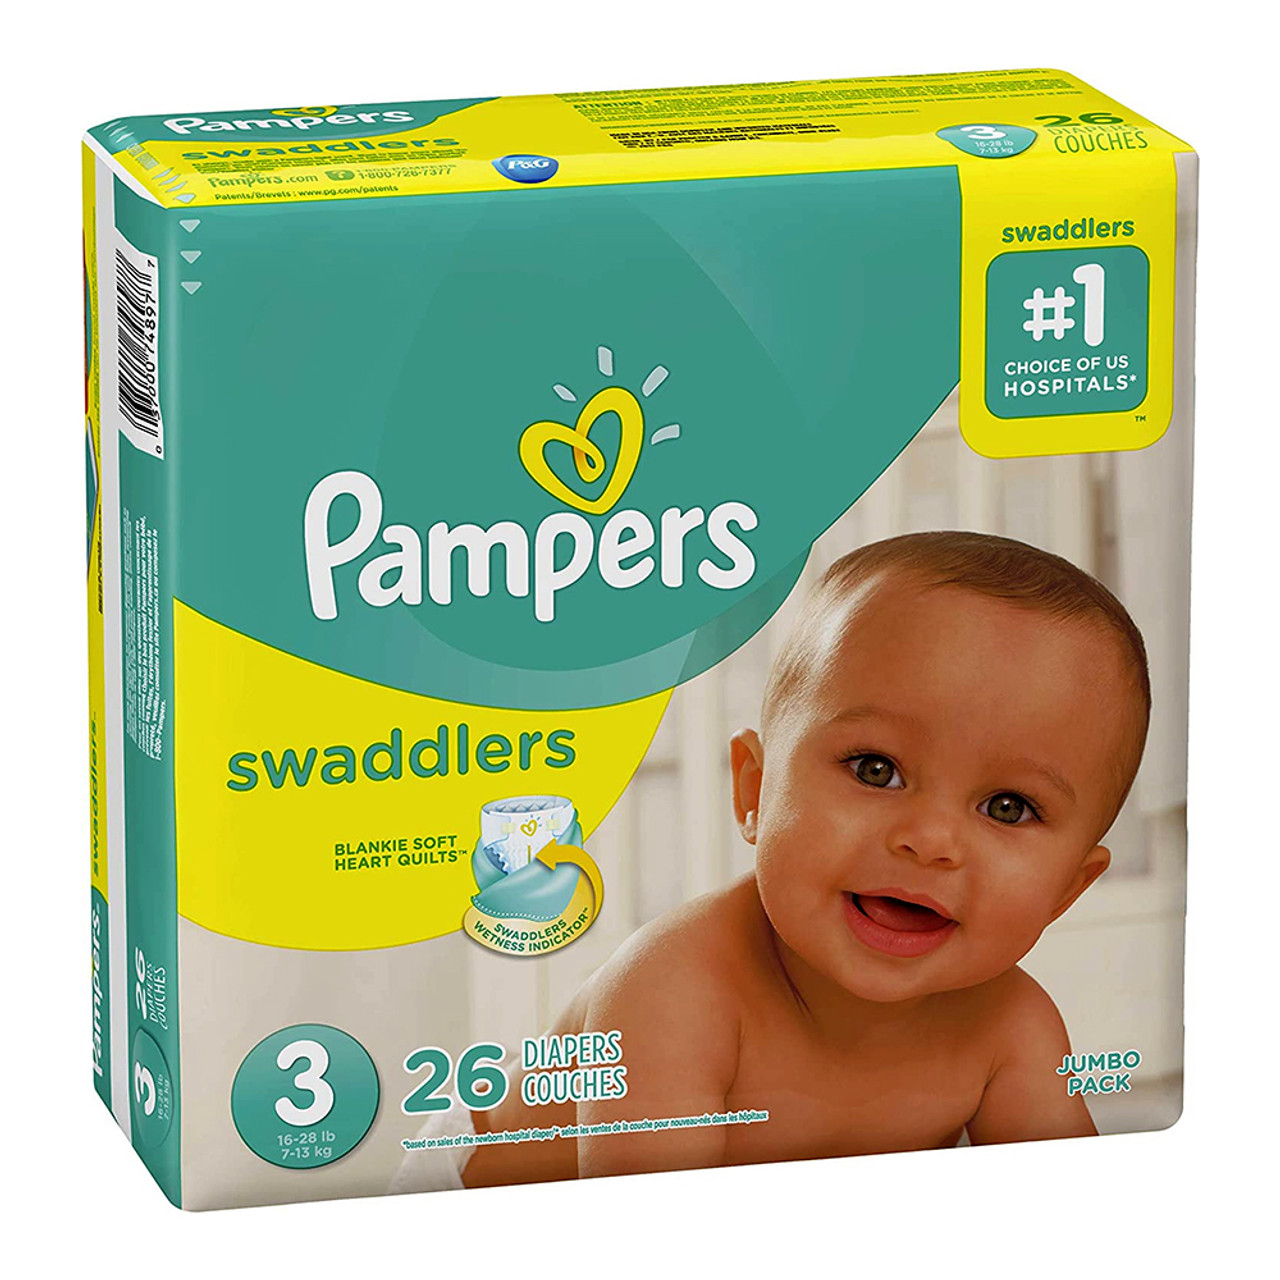 Diaper Brand Spotlight Series: Pampers Pure Protection - Diaper